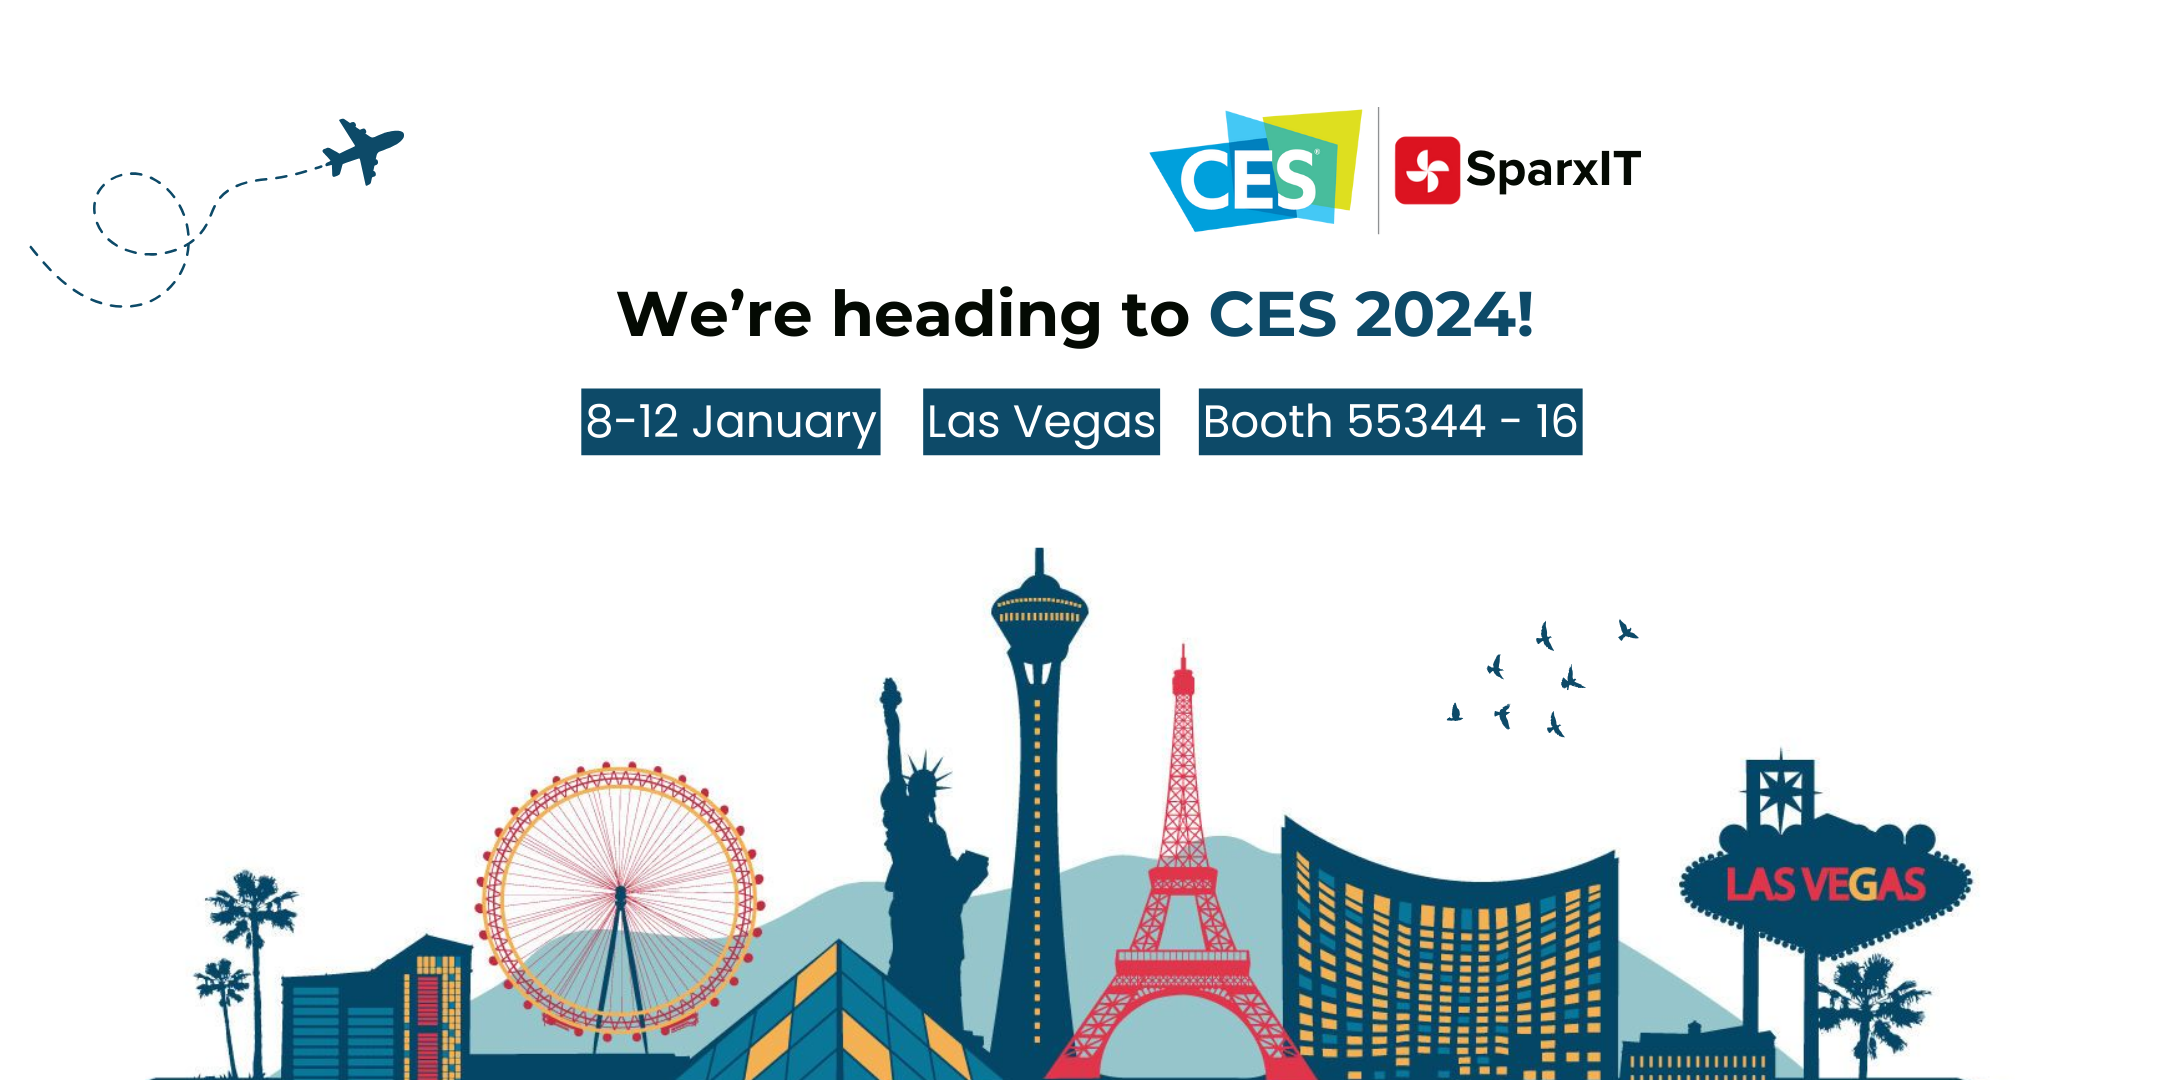 Meet SparxIT at CES 2024, New York, United States